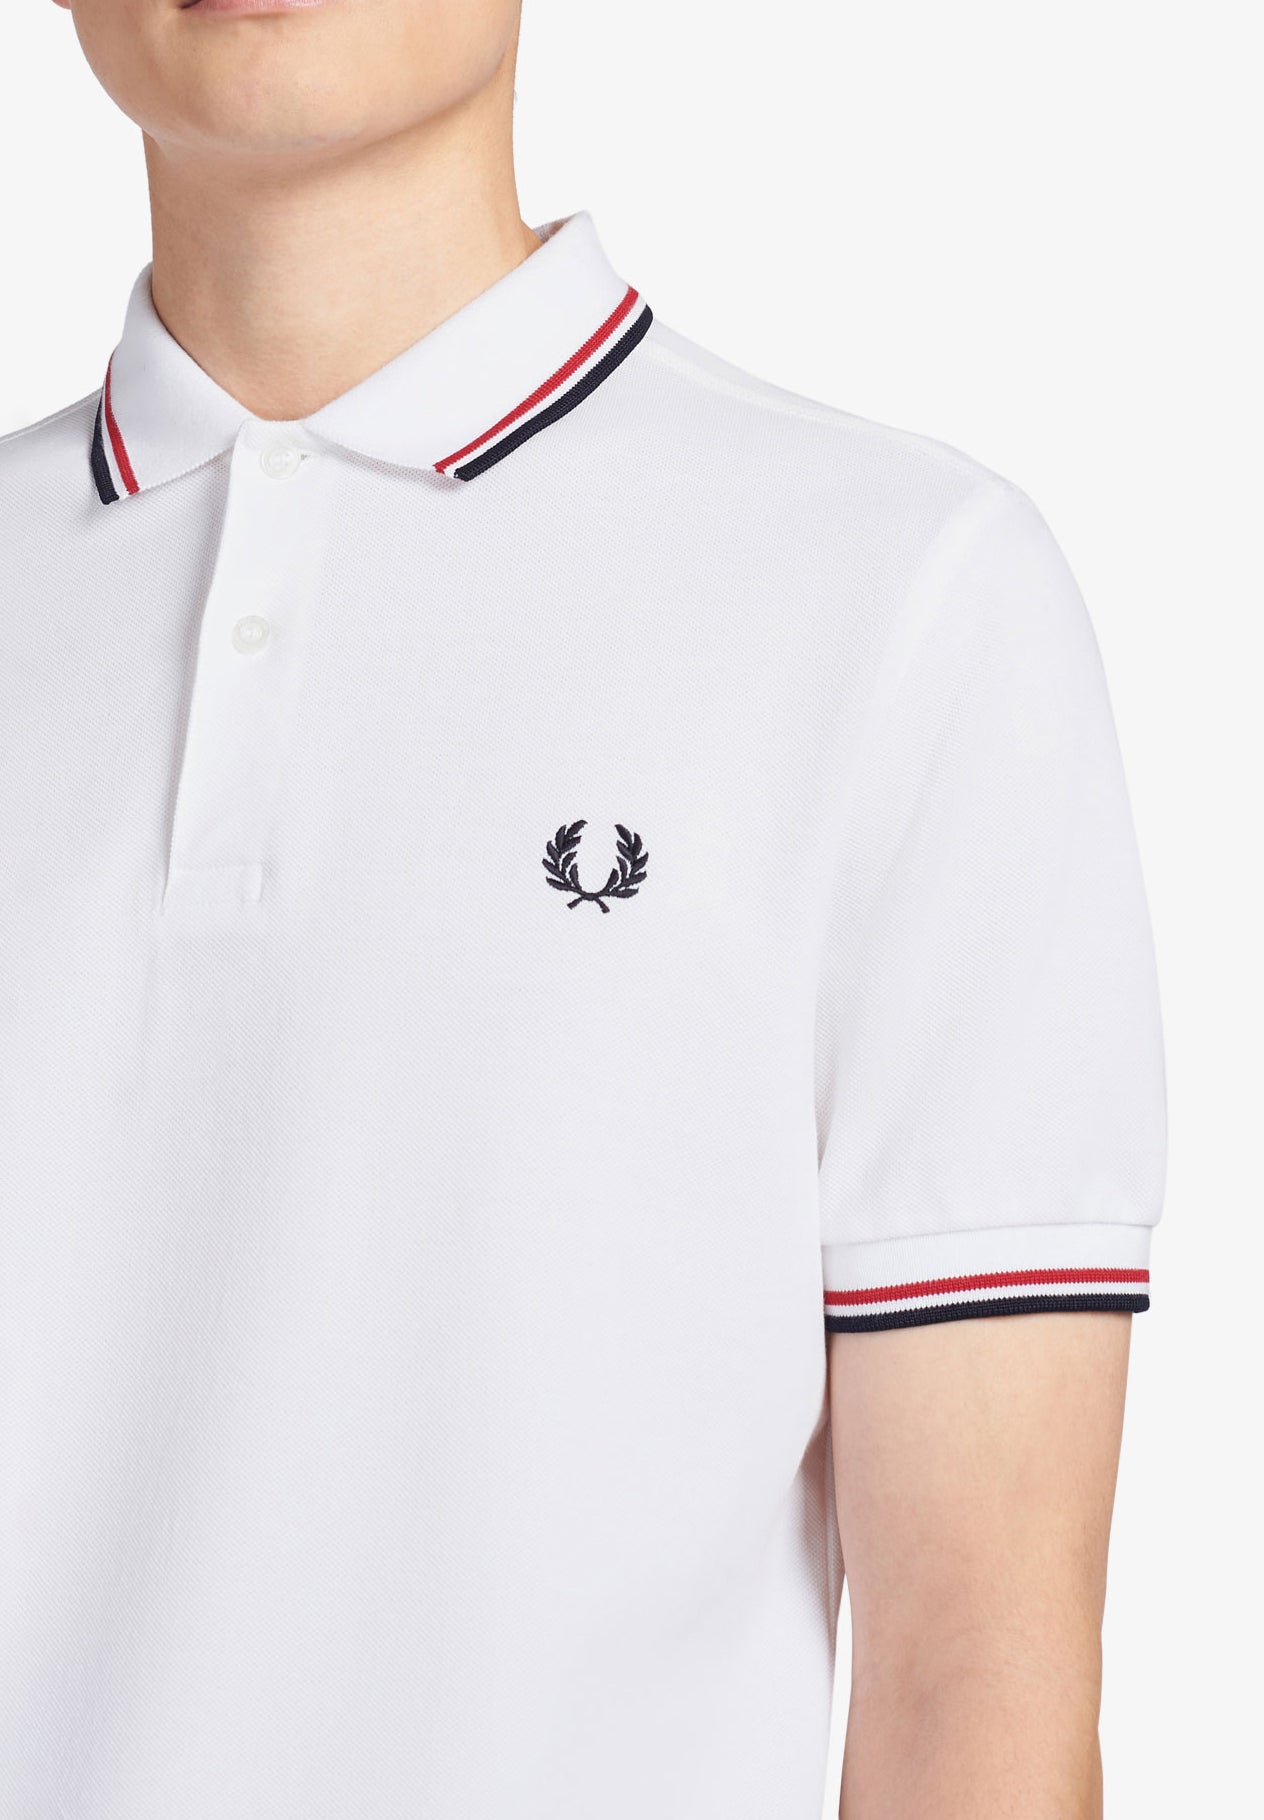 FRED PERRY | POLO RIBETES RAYAS M3600